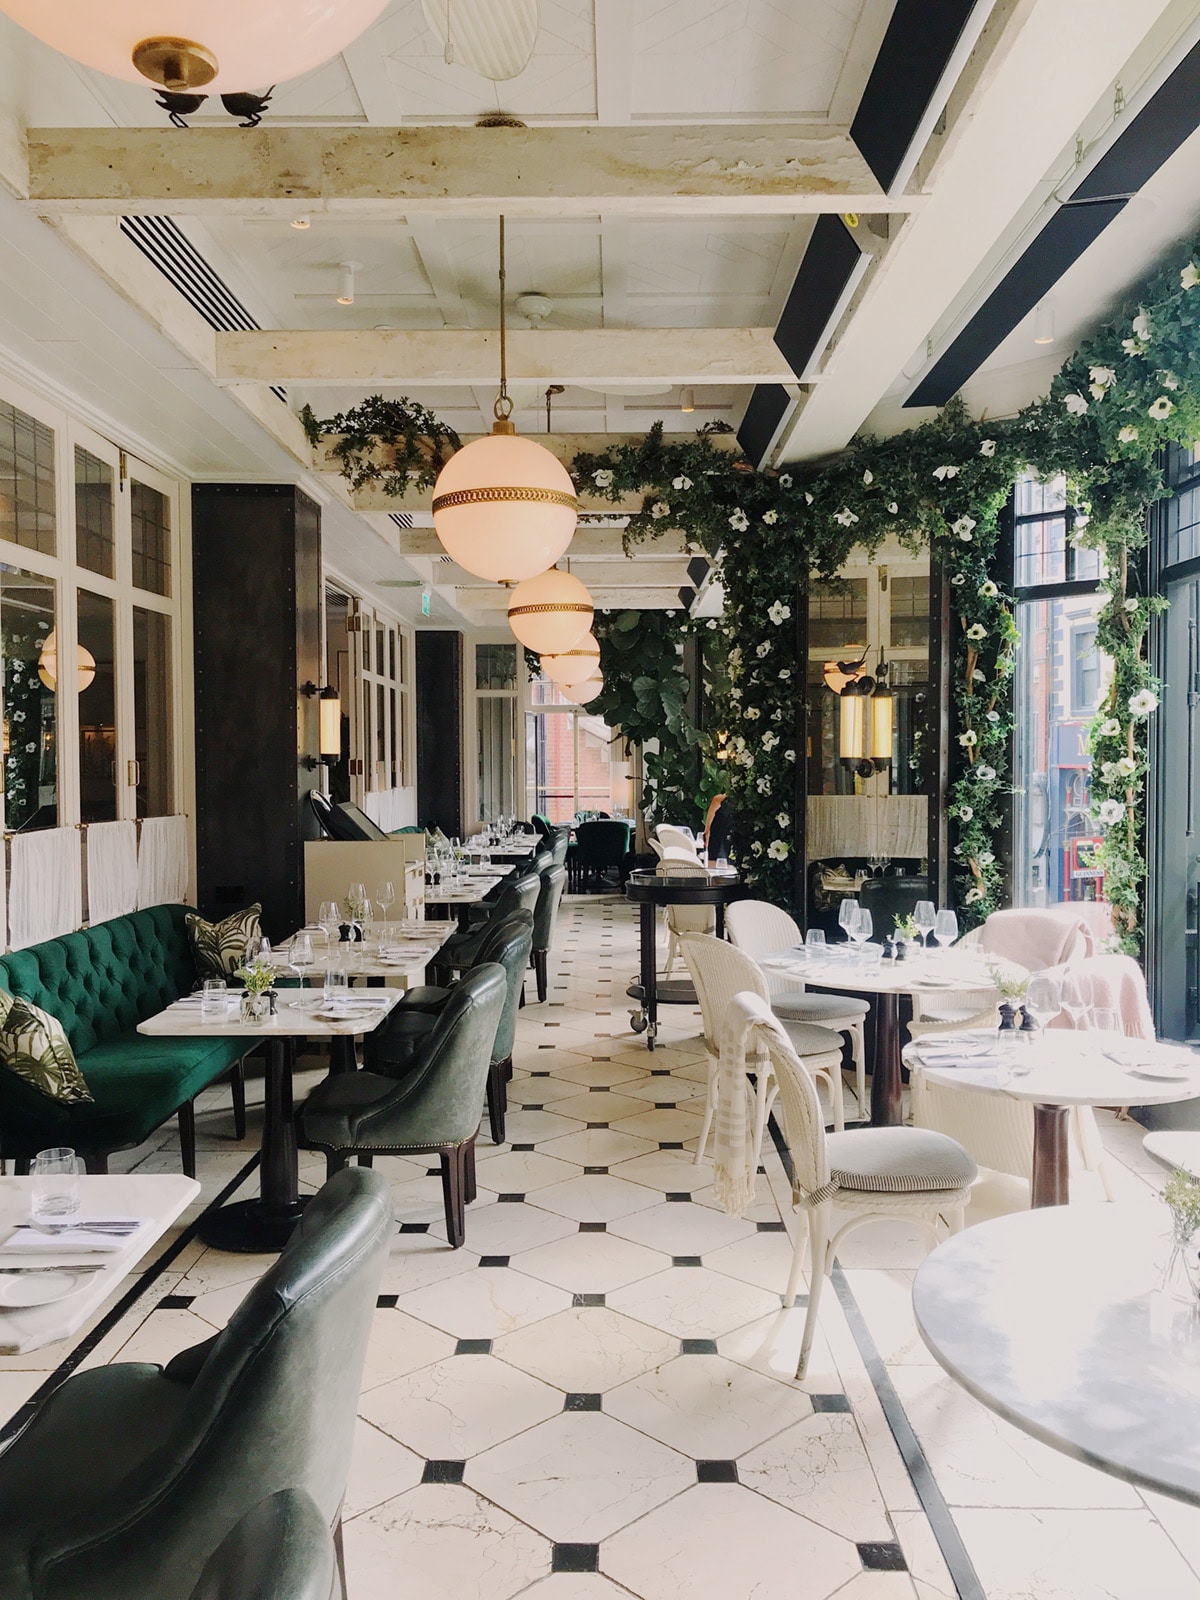 the gorgeous floral-lined windows at wilde restaurant | dublin city guide on coco kelley